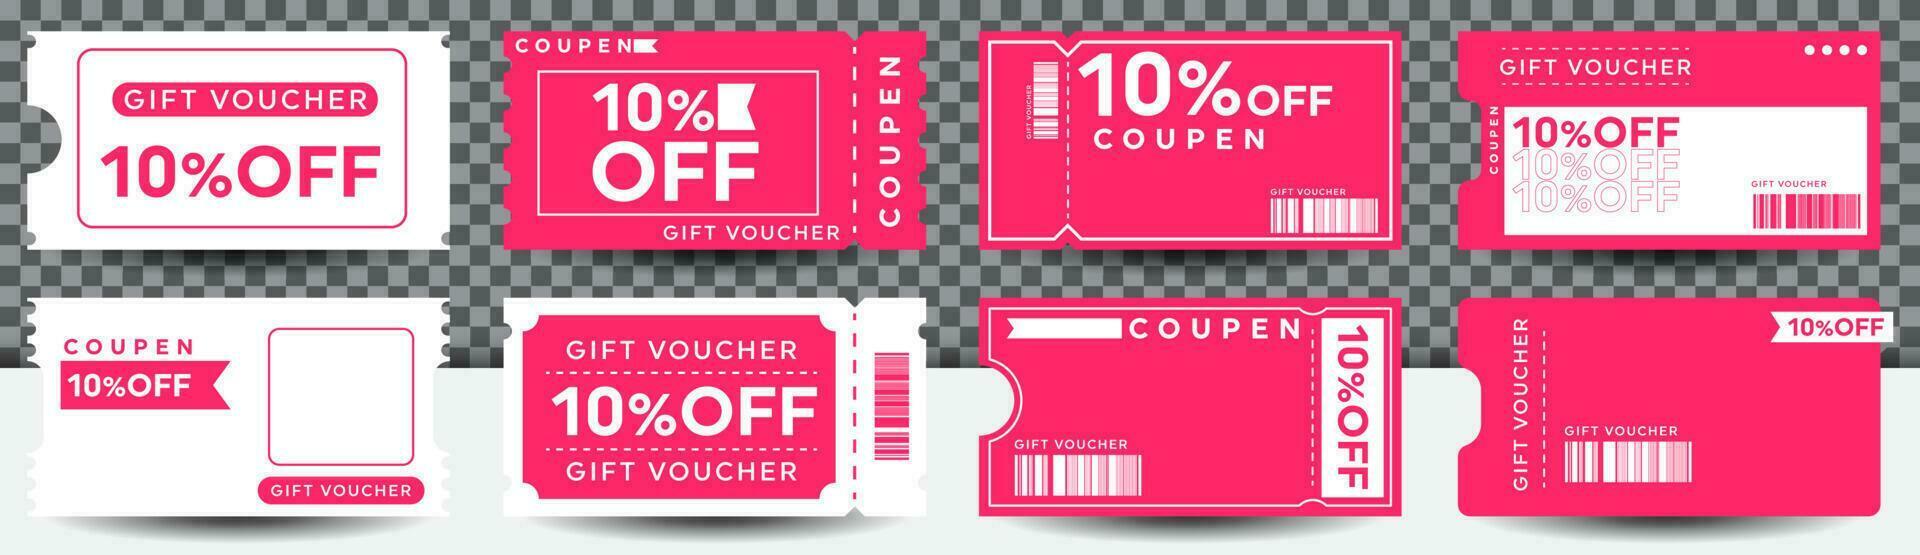 Vector design COUPON FASHION TICKET CARD template element for graphic design. Illustration of graphic vector elements